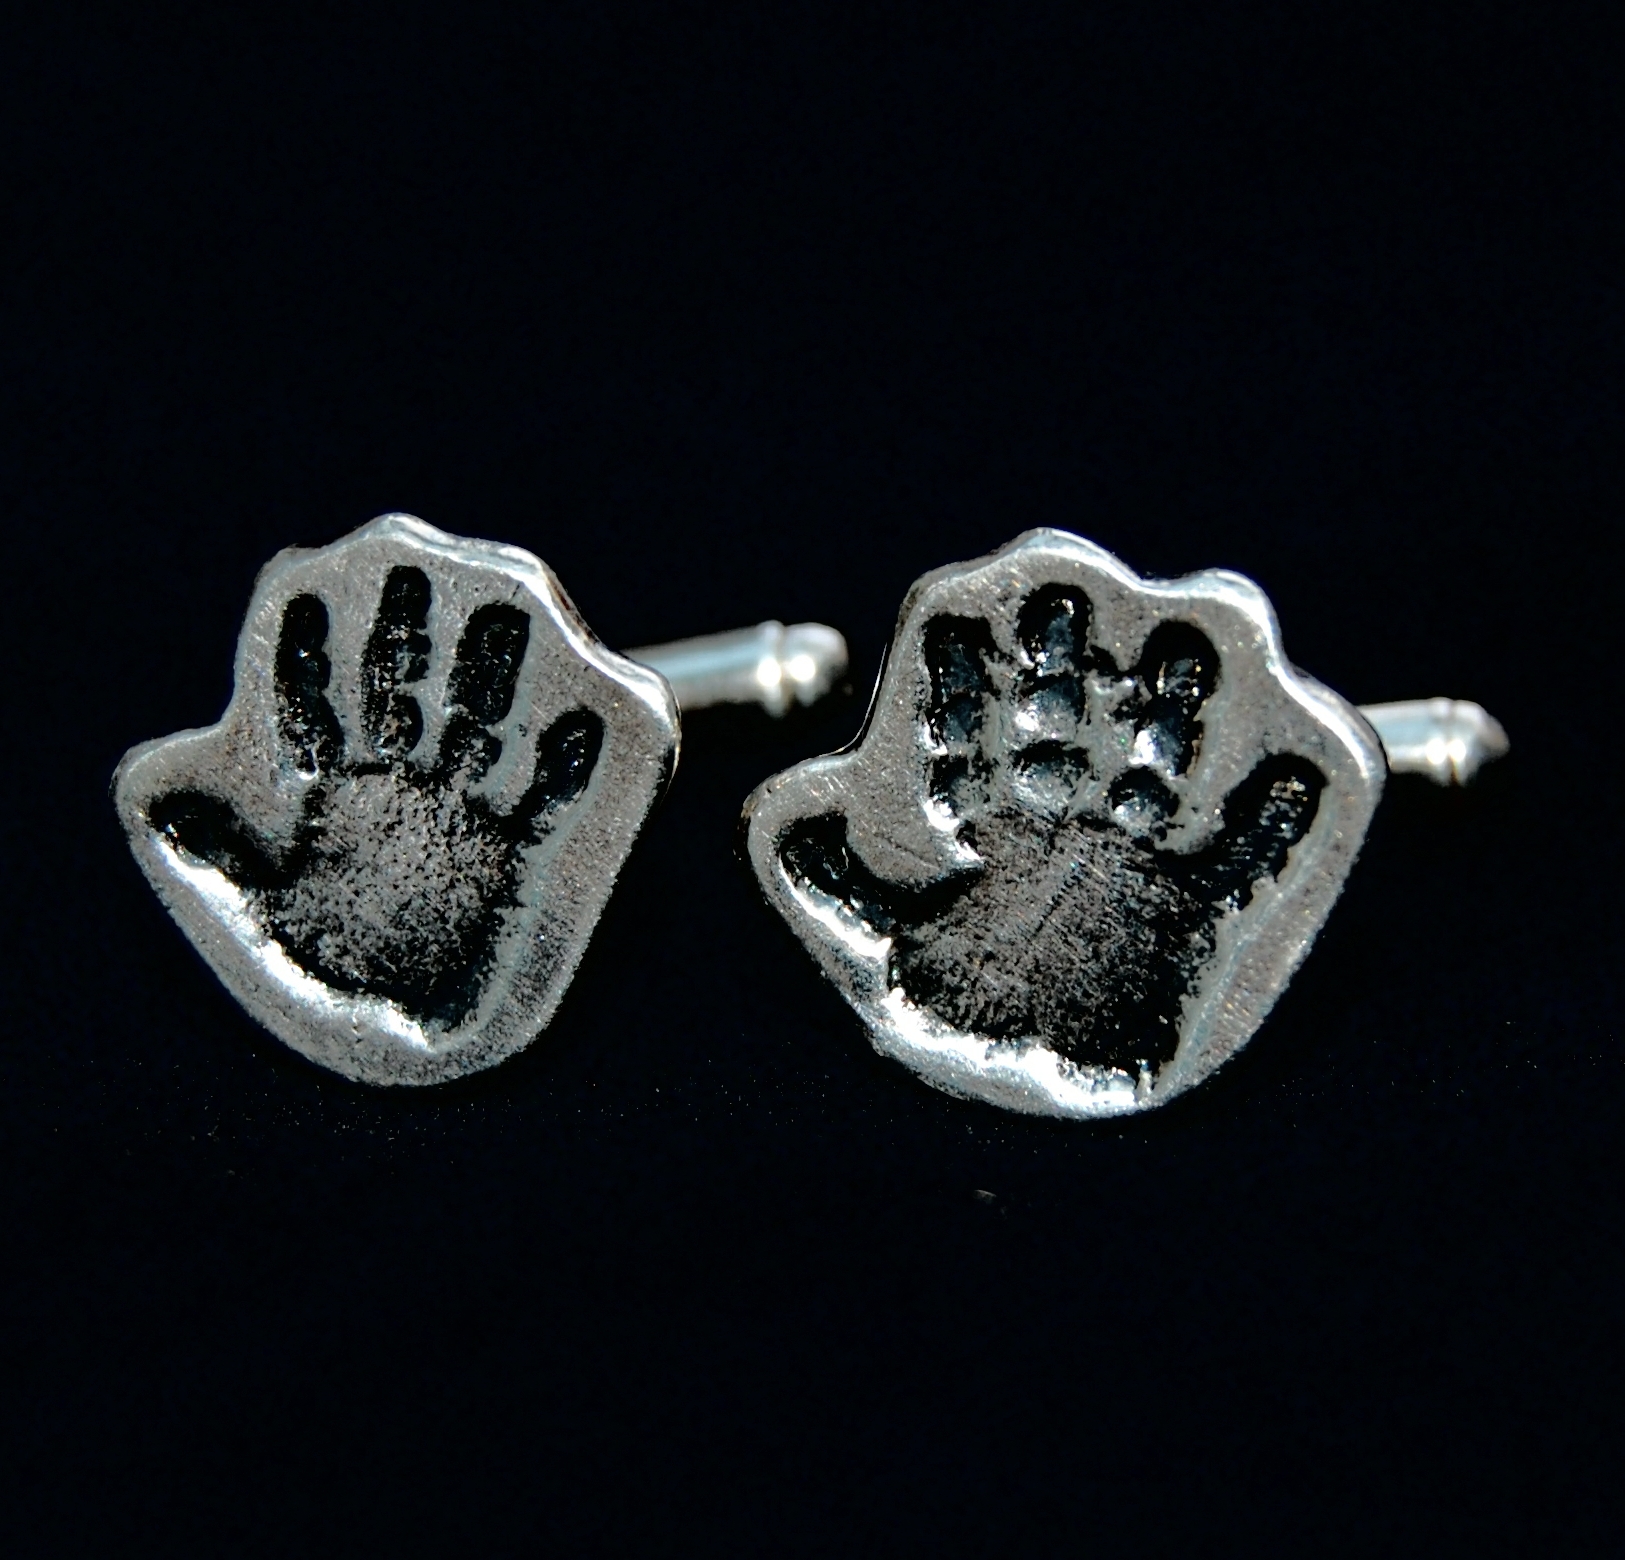 Silver cufflinks cut by hand in the shape of the handprints. Initials hand inscribed on the back.